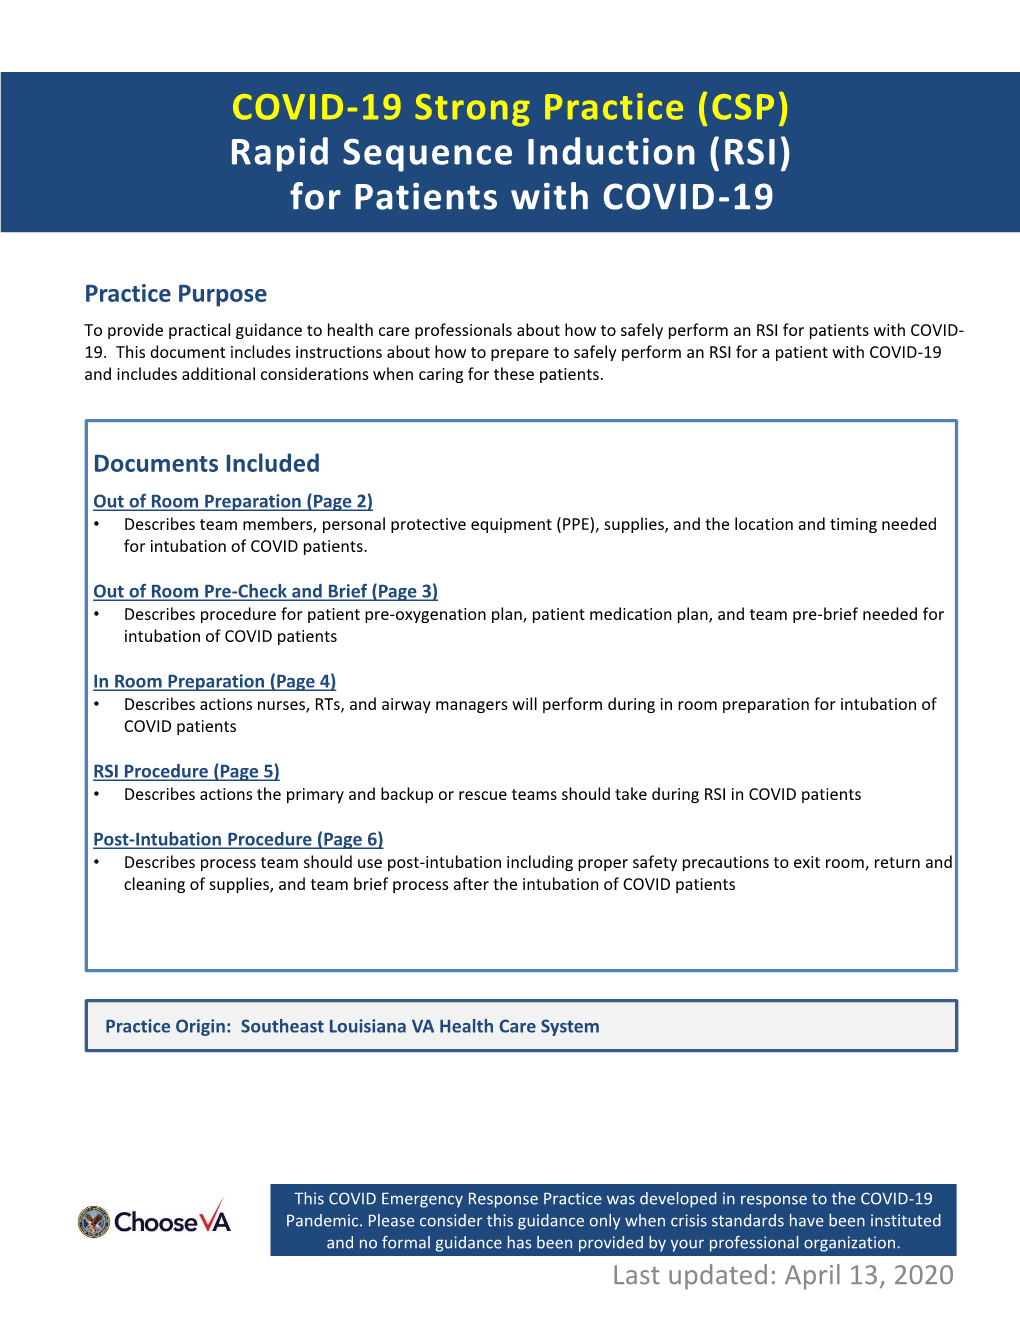 (CSP) Rapid Sequence Induction (RSI) for Patients with COVID-19